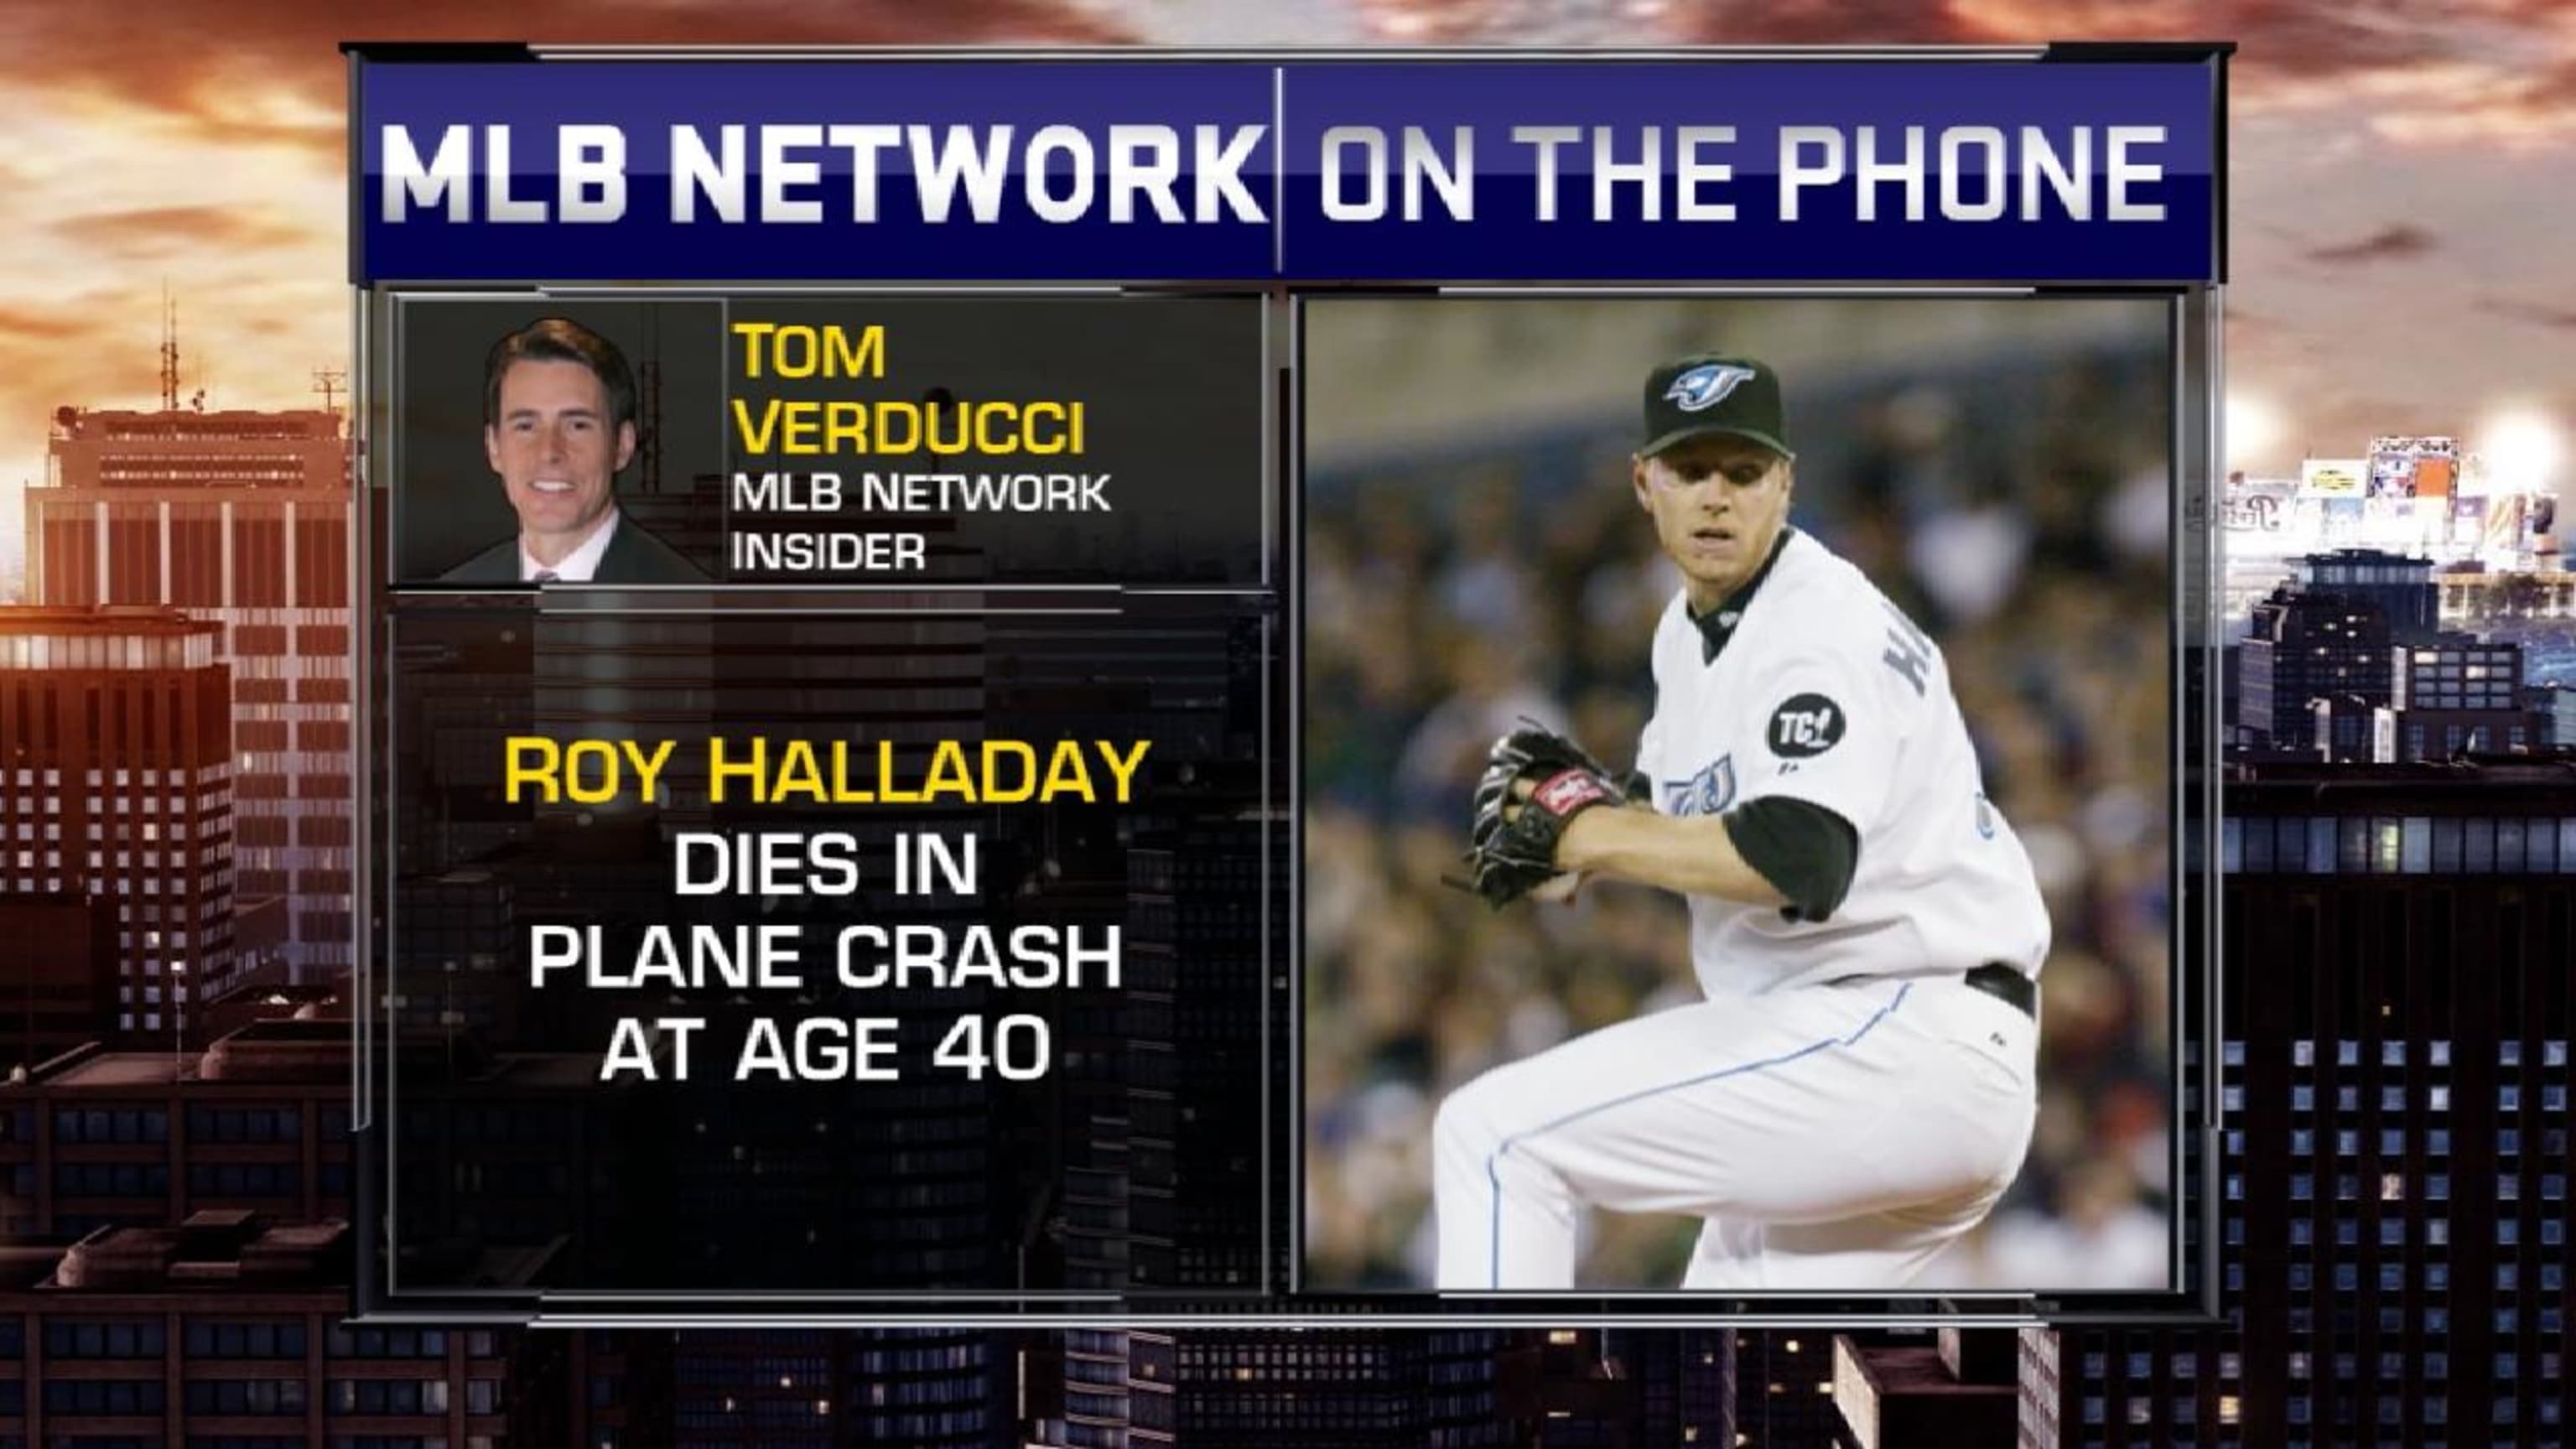 Before Roy Halladay died, he called a potential Hall of Fame nod 'a  tremendous honor